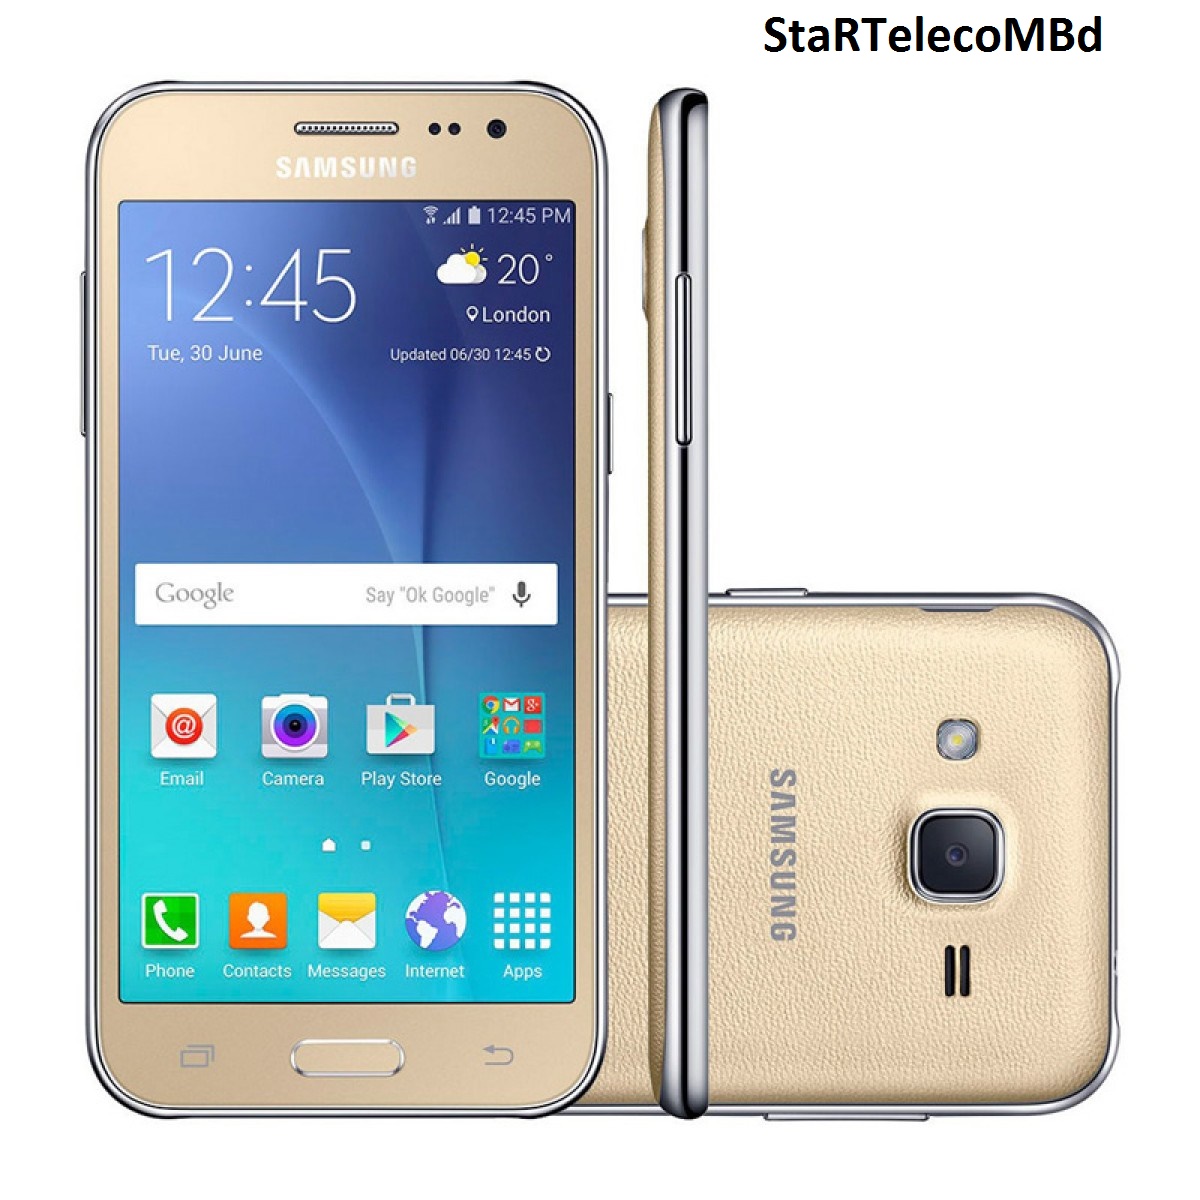 Download Flashing Software For Samsung Android Phones